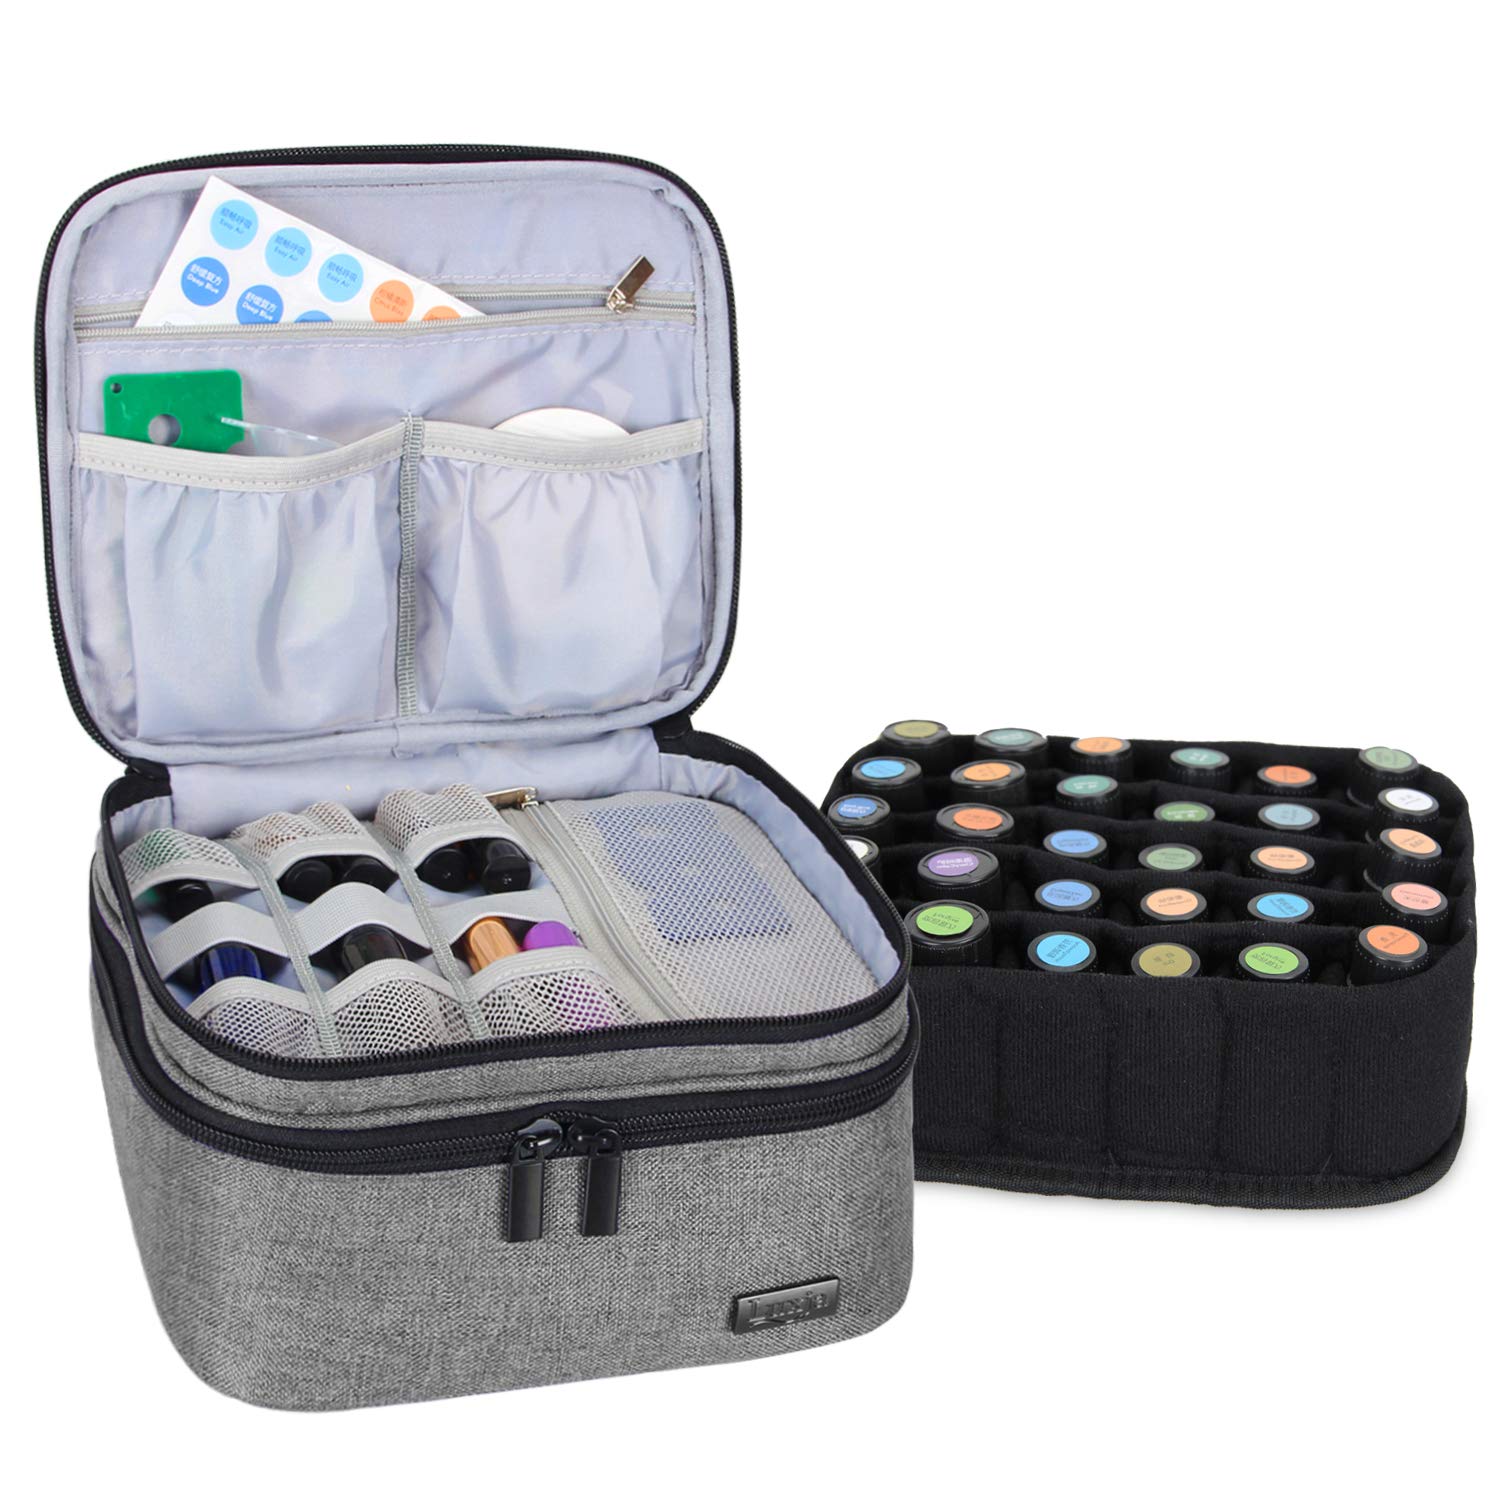 LUXJA Essential Oil Carrying Case - Holds 30 Bottles (5ml-30ml, Also Fits for Roller Bottles), Double-Layer Organizer for Essential Oil and Accessories, Gray (Bag Only)